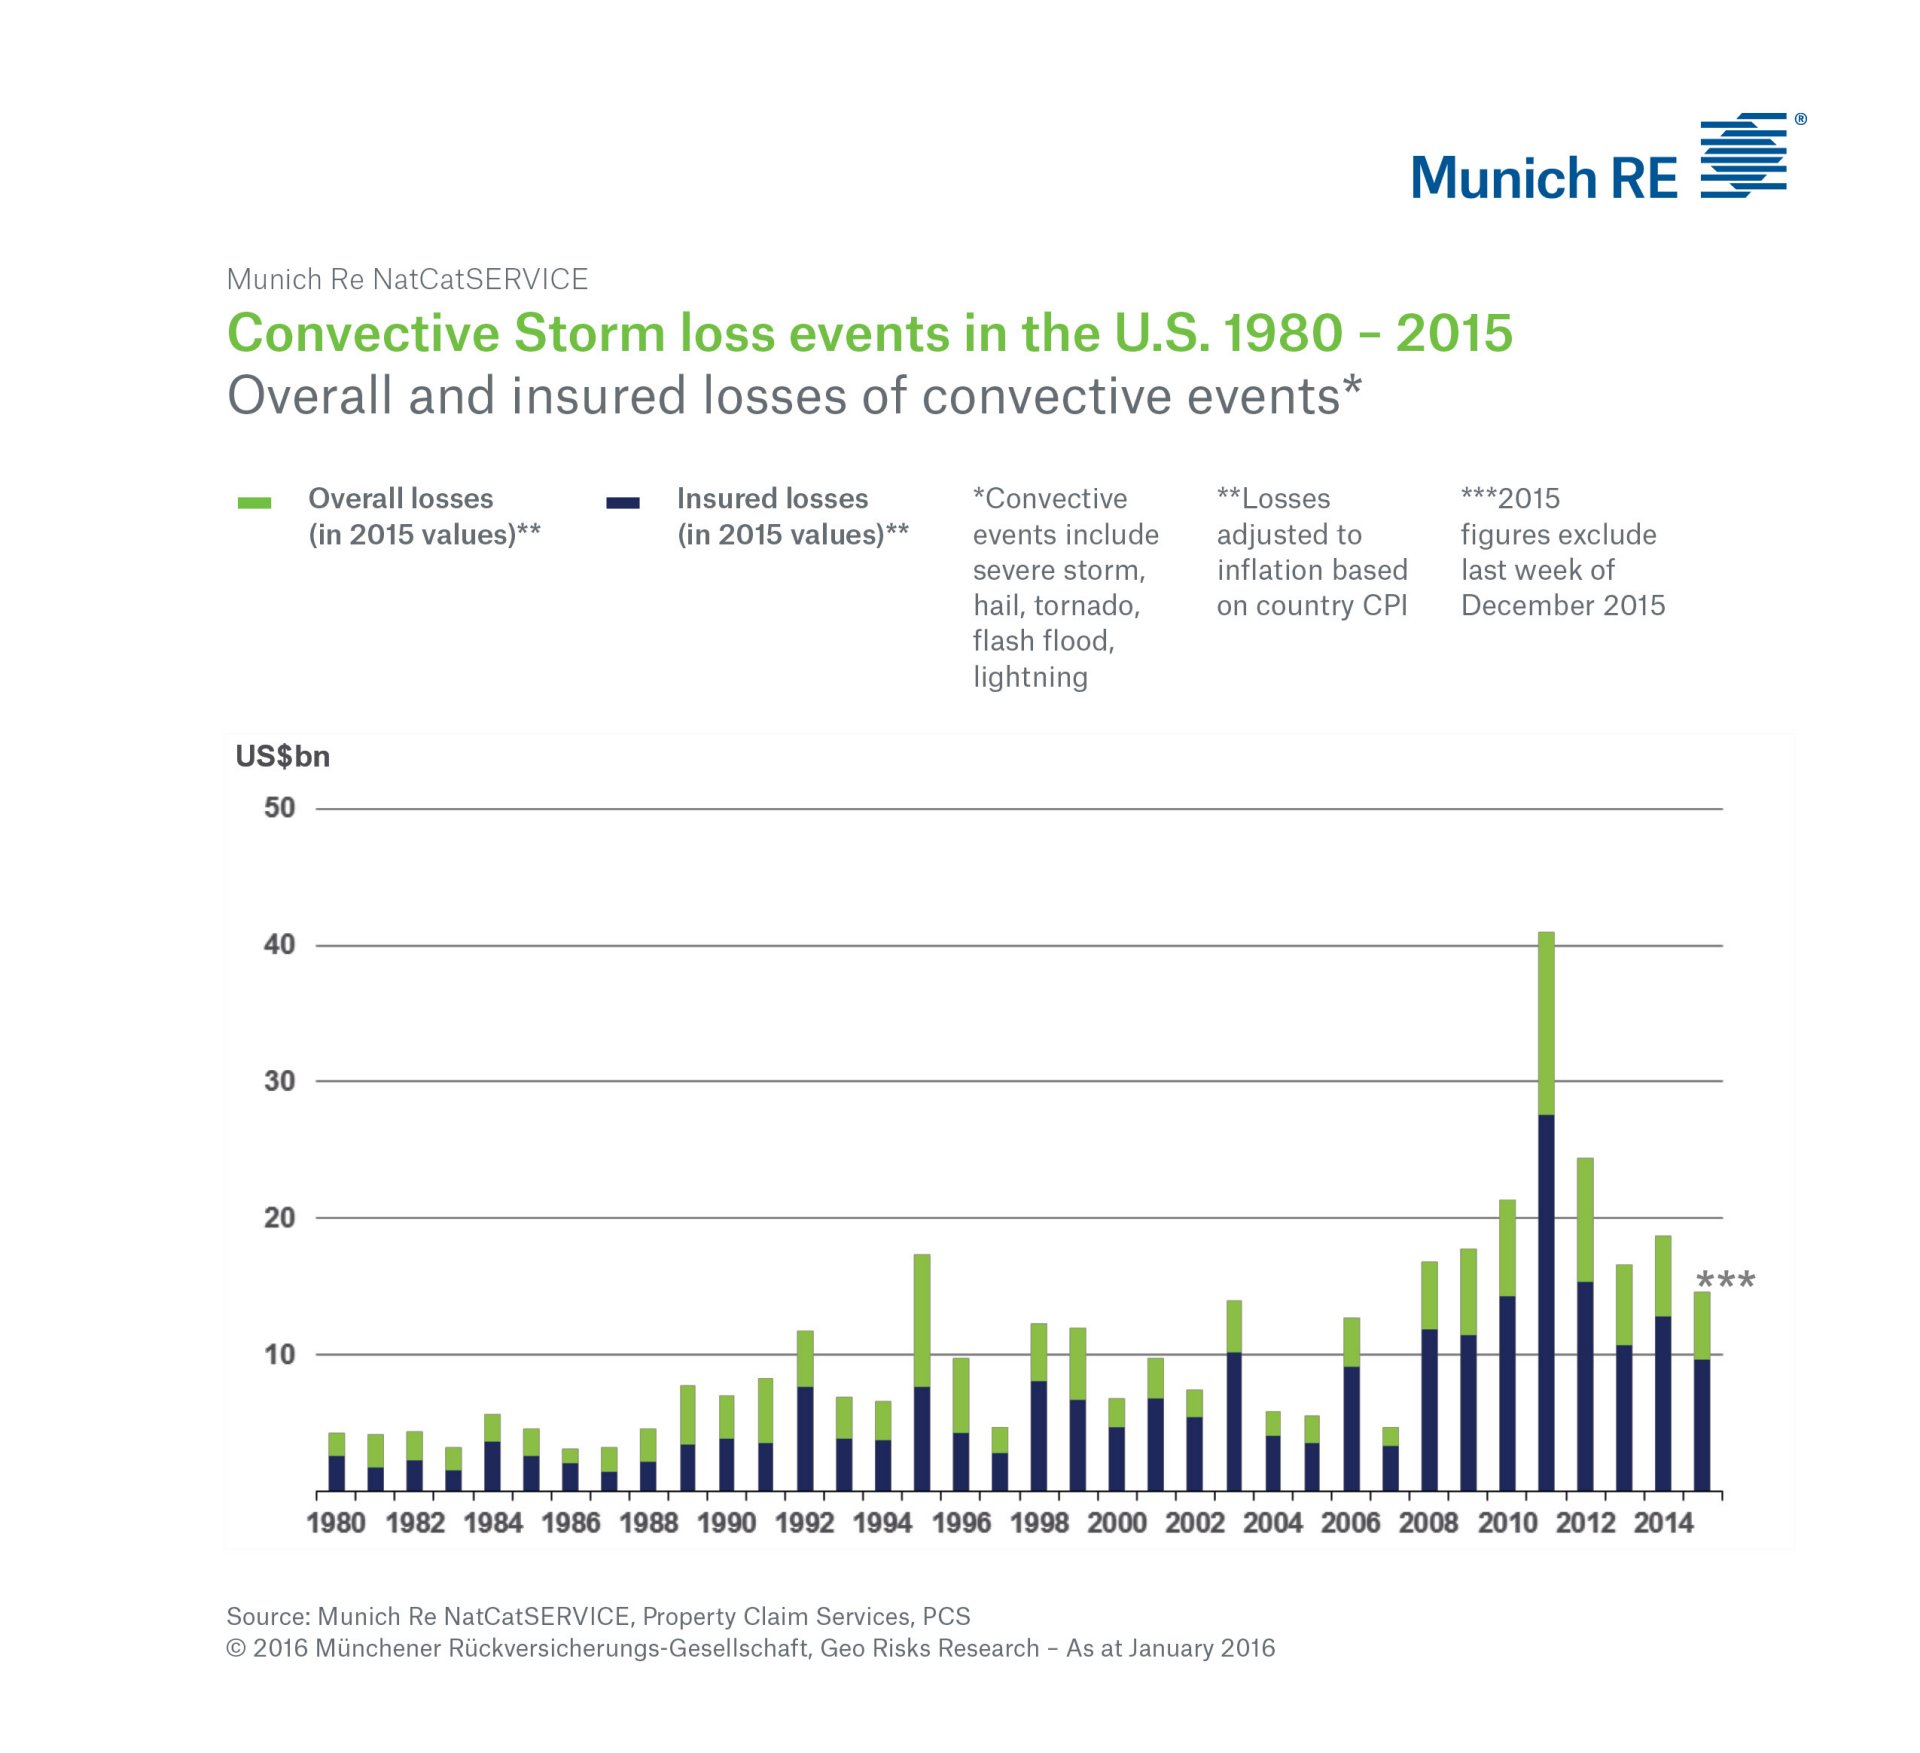 Convective Storm loss events in the U.S. 1980 - 2015